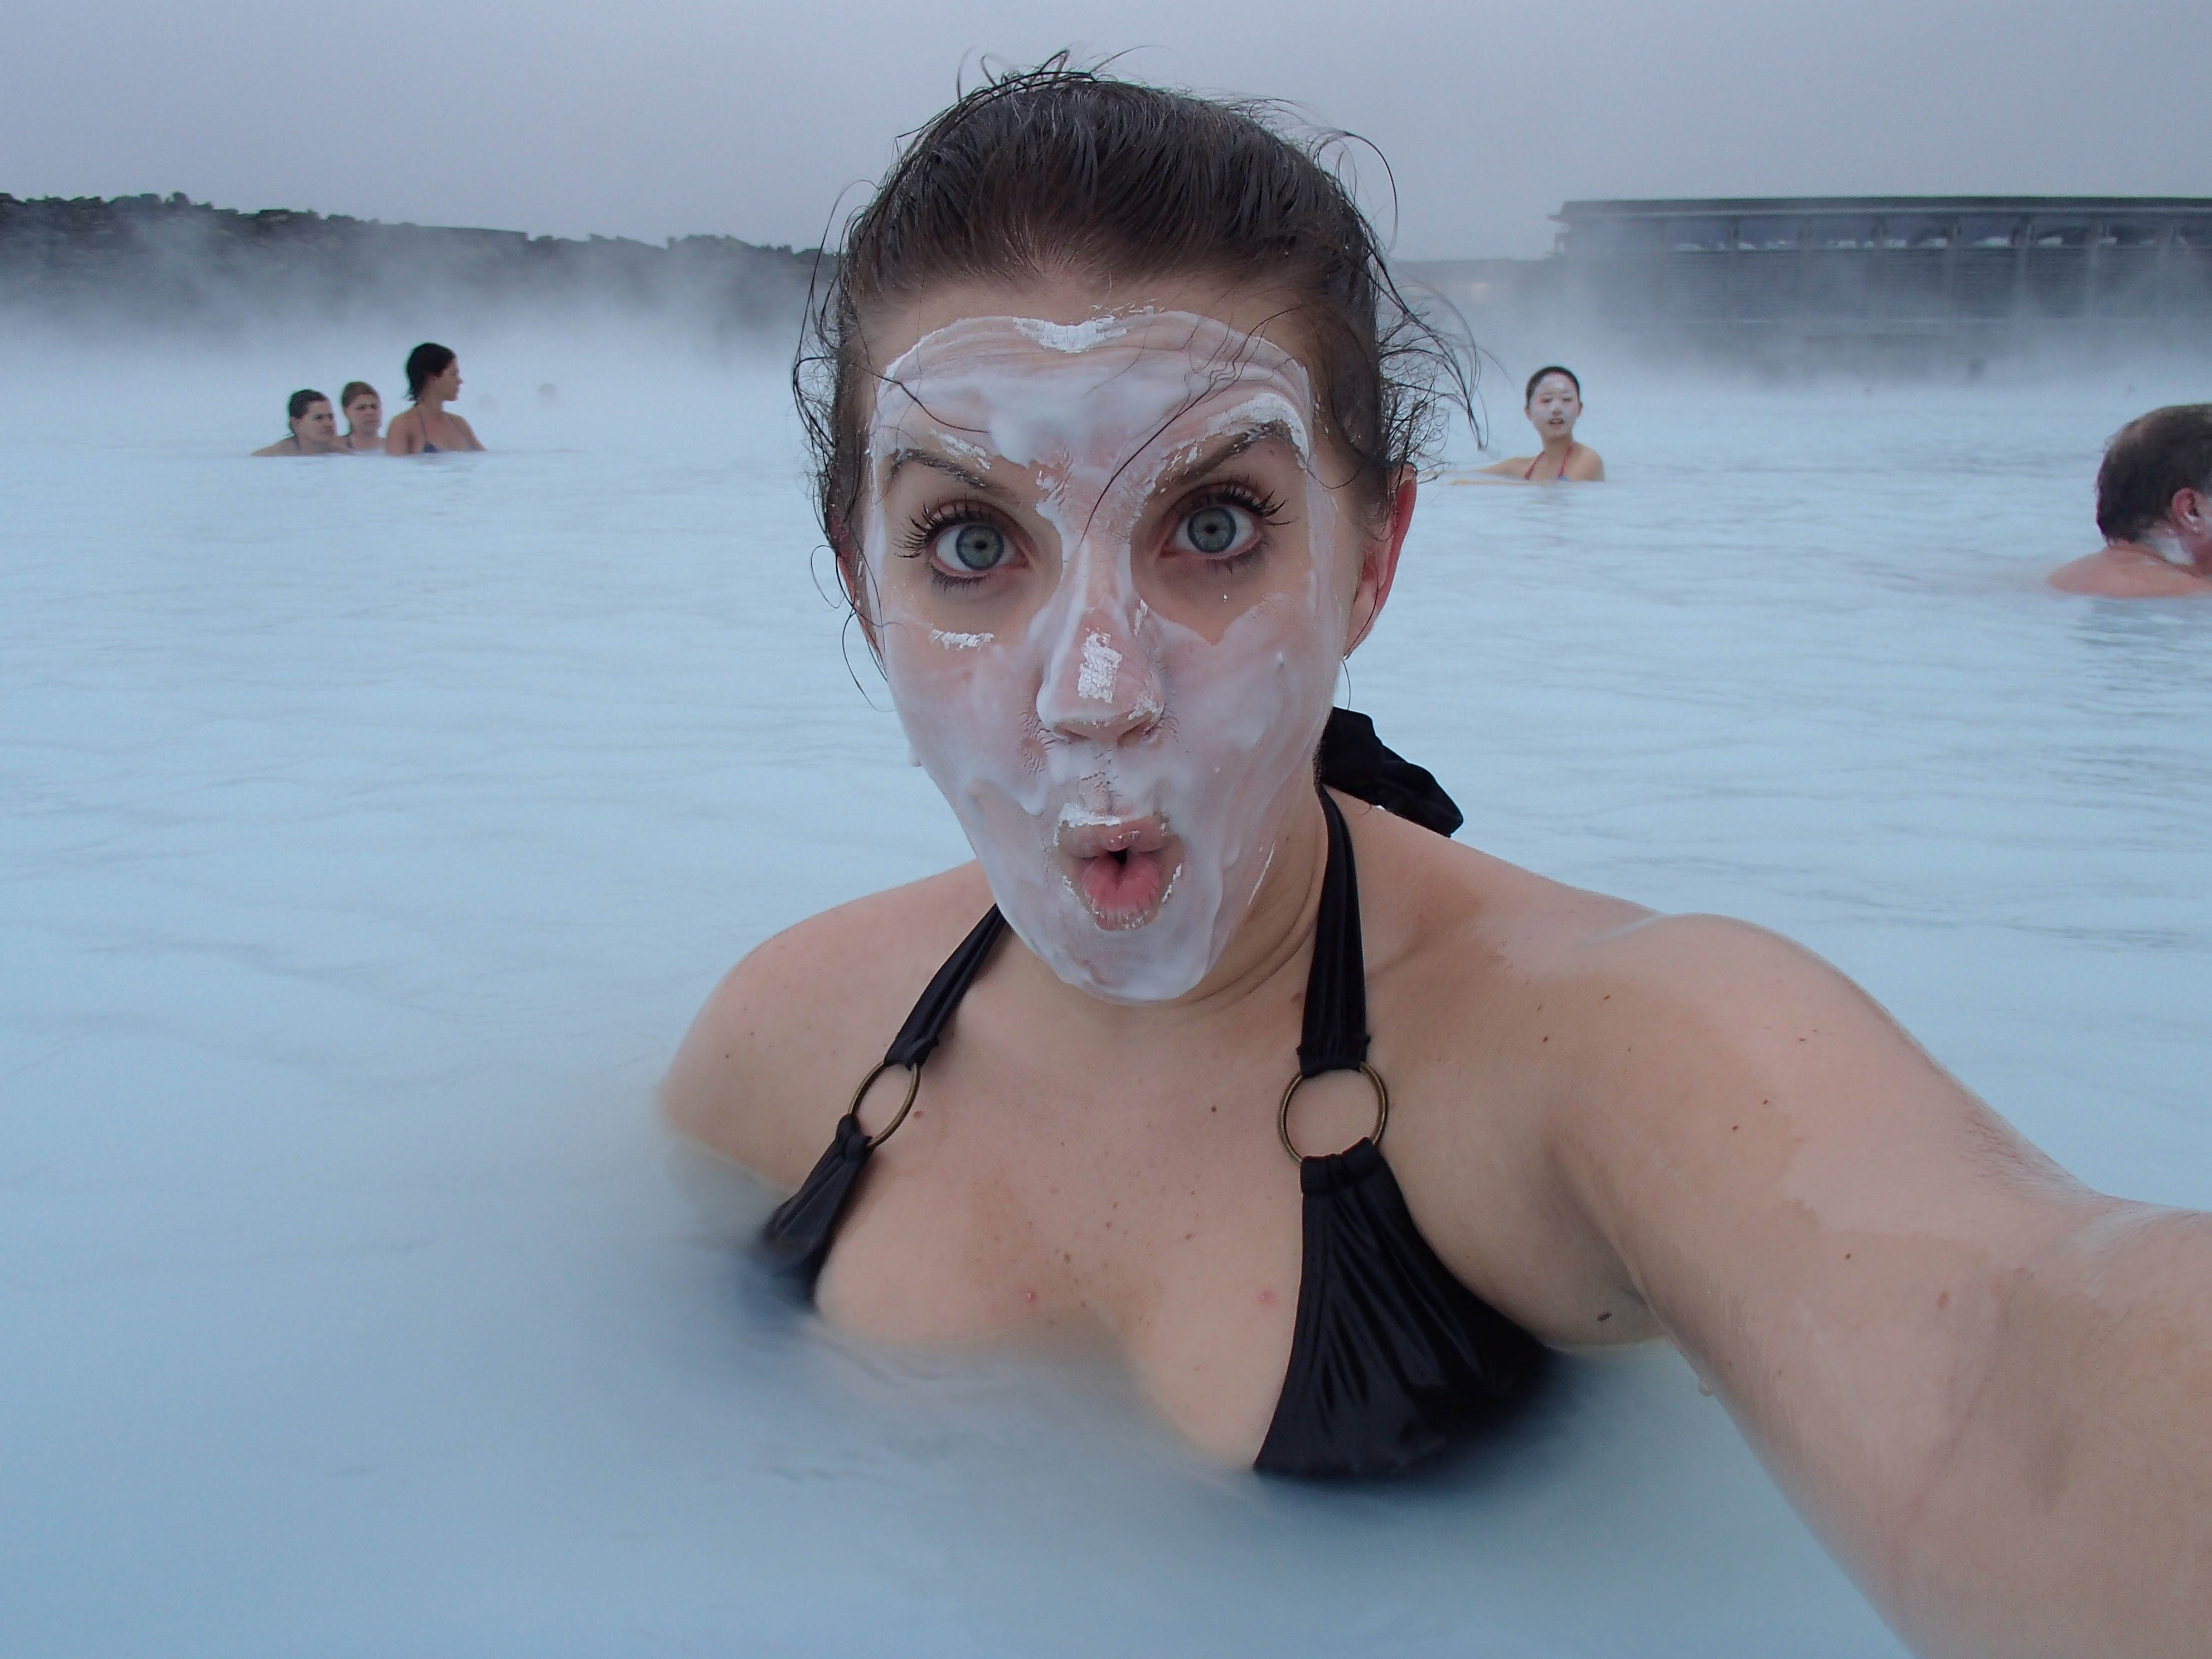 Does iceland smell like a fart?